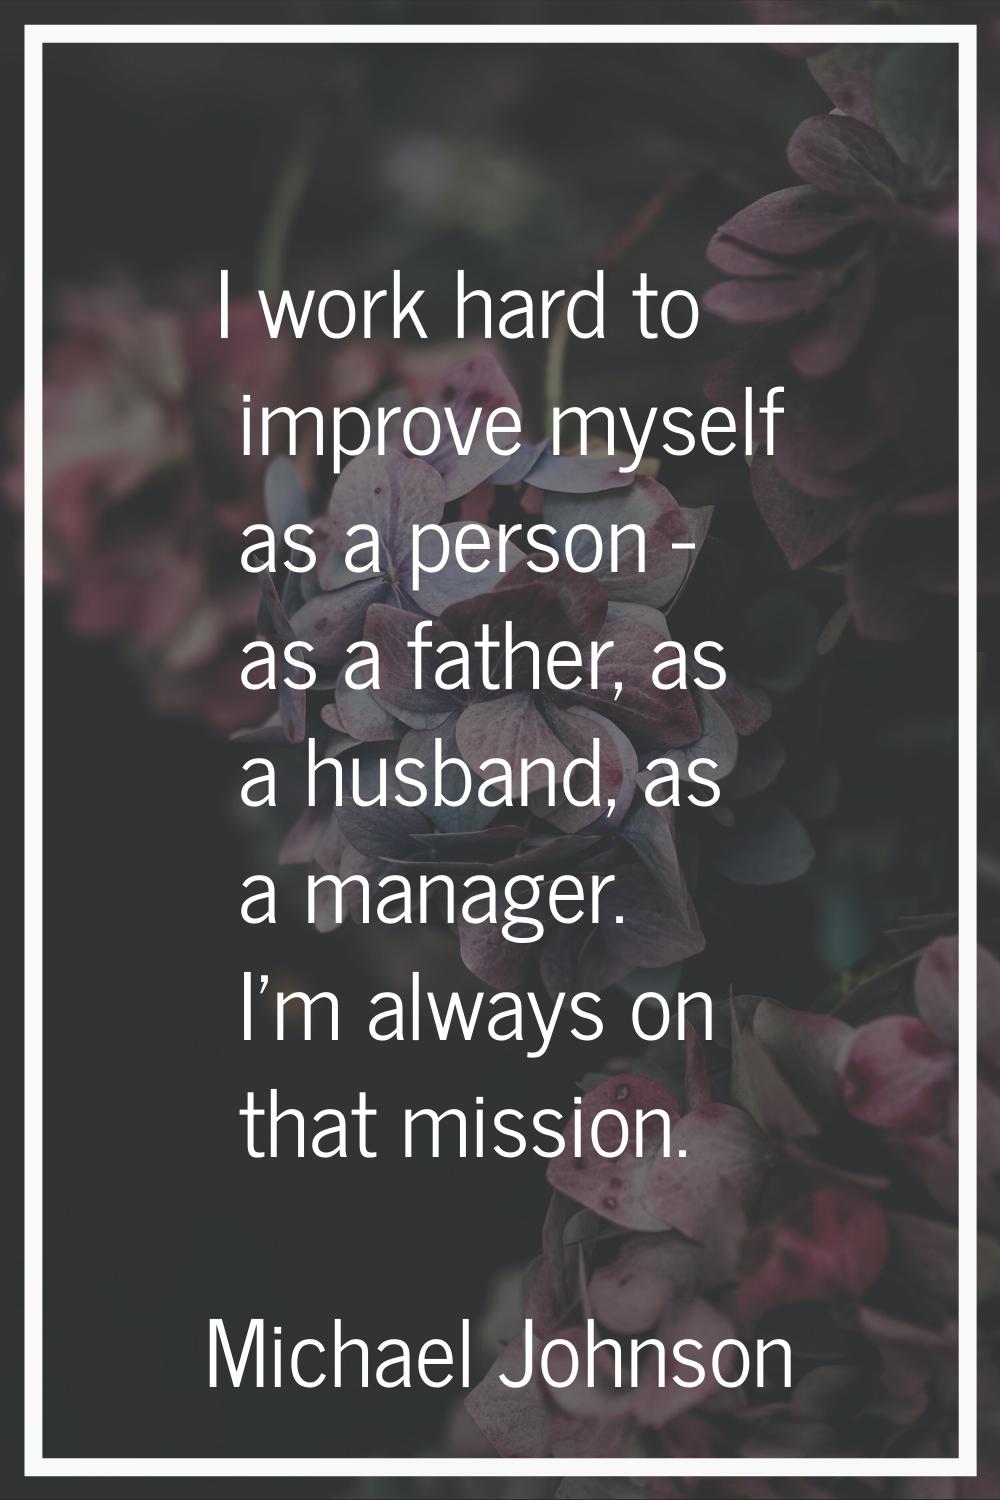 I work hard to improve myself as a person - as a father, as a husband, as a manager. I'm always on 